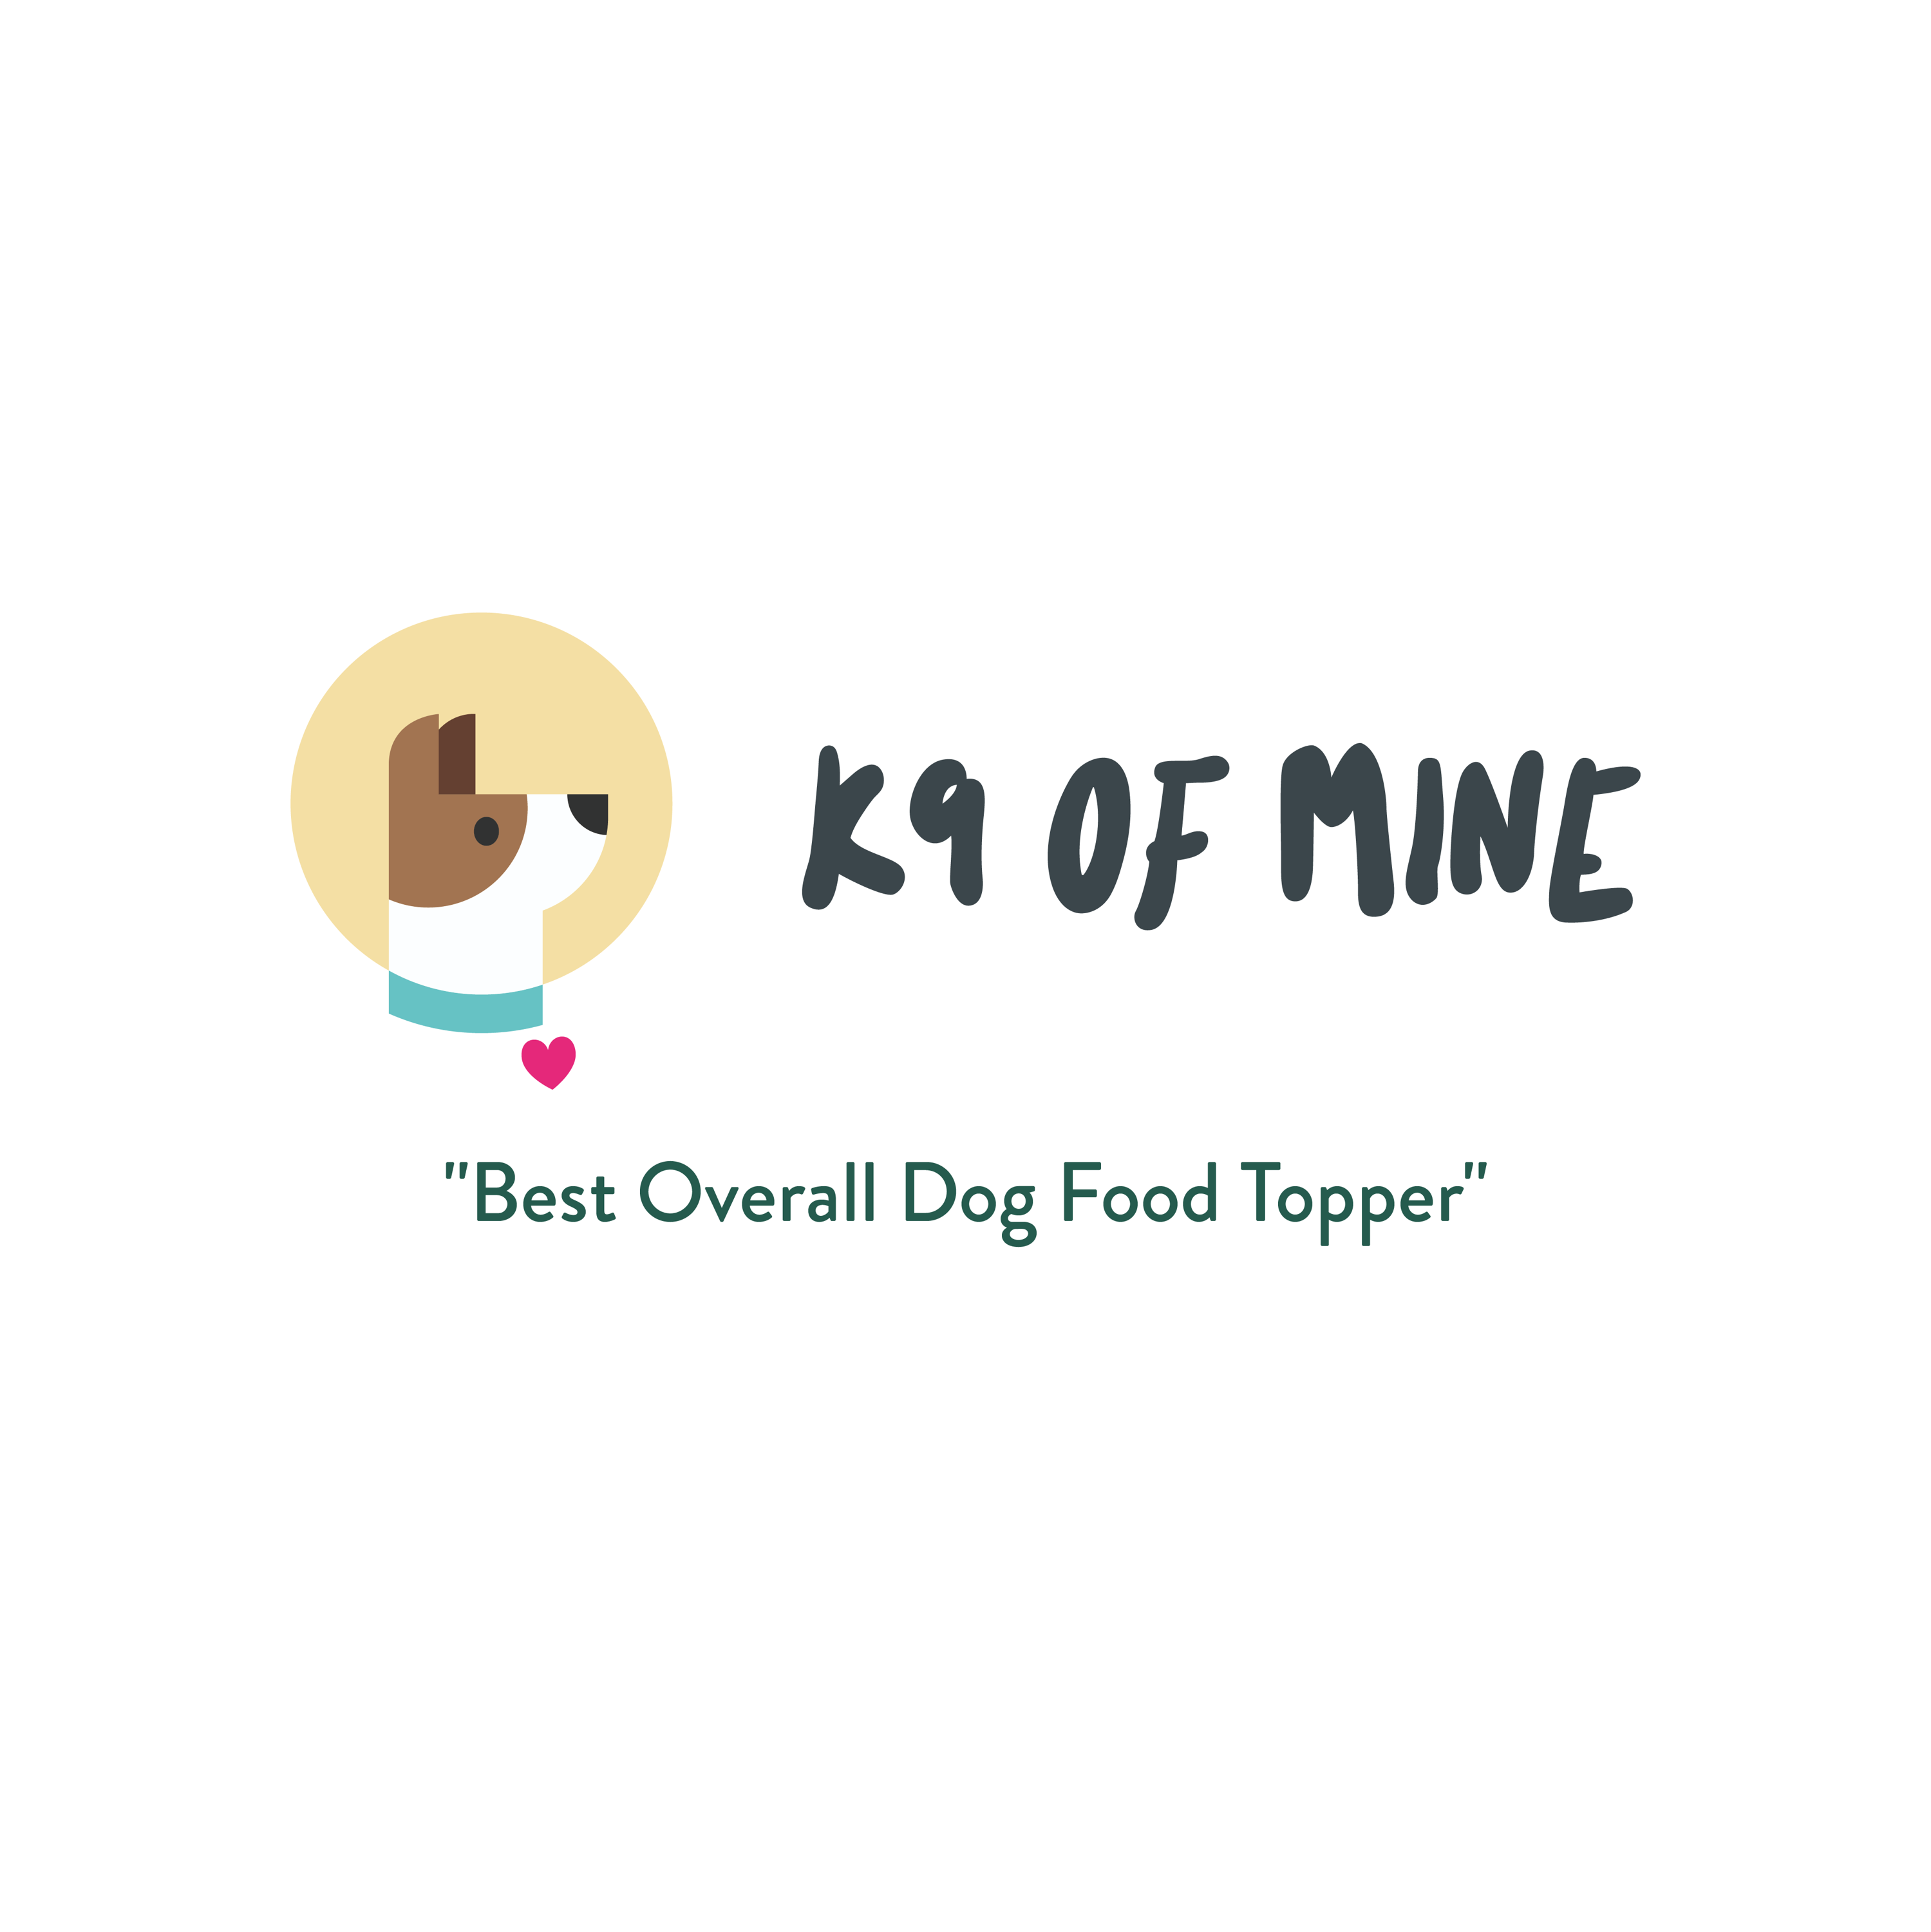 Considered the Best Overall Dog Food Topper by K9ofmine.com